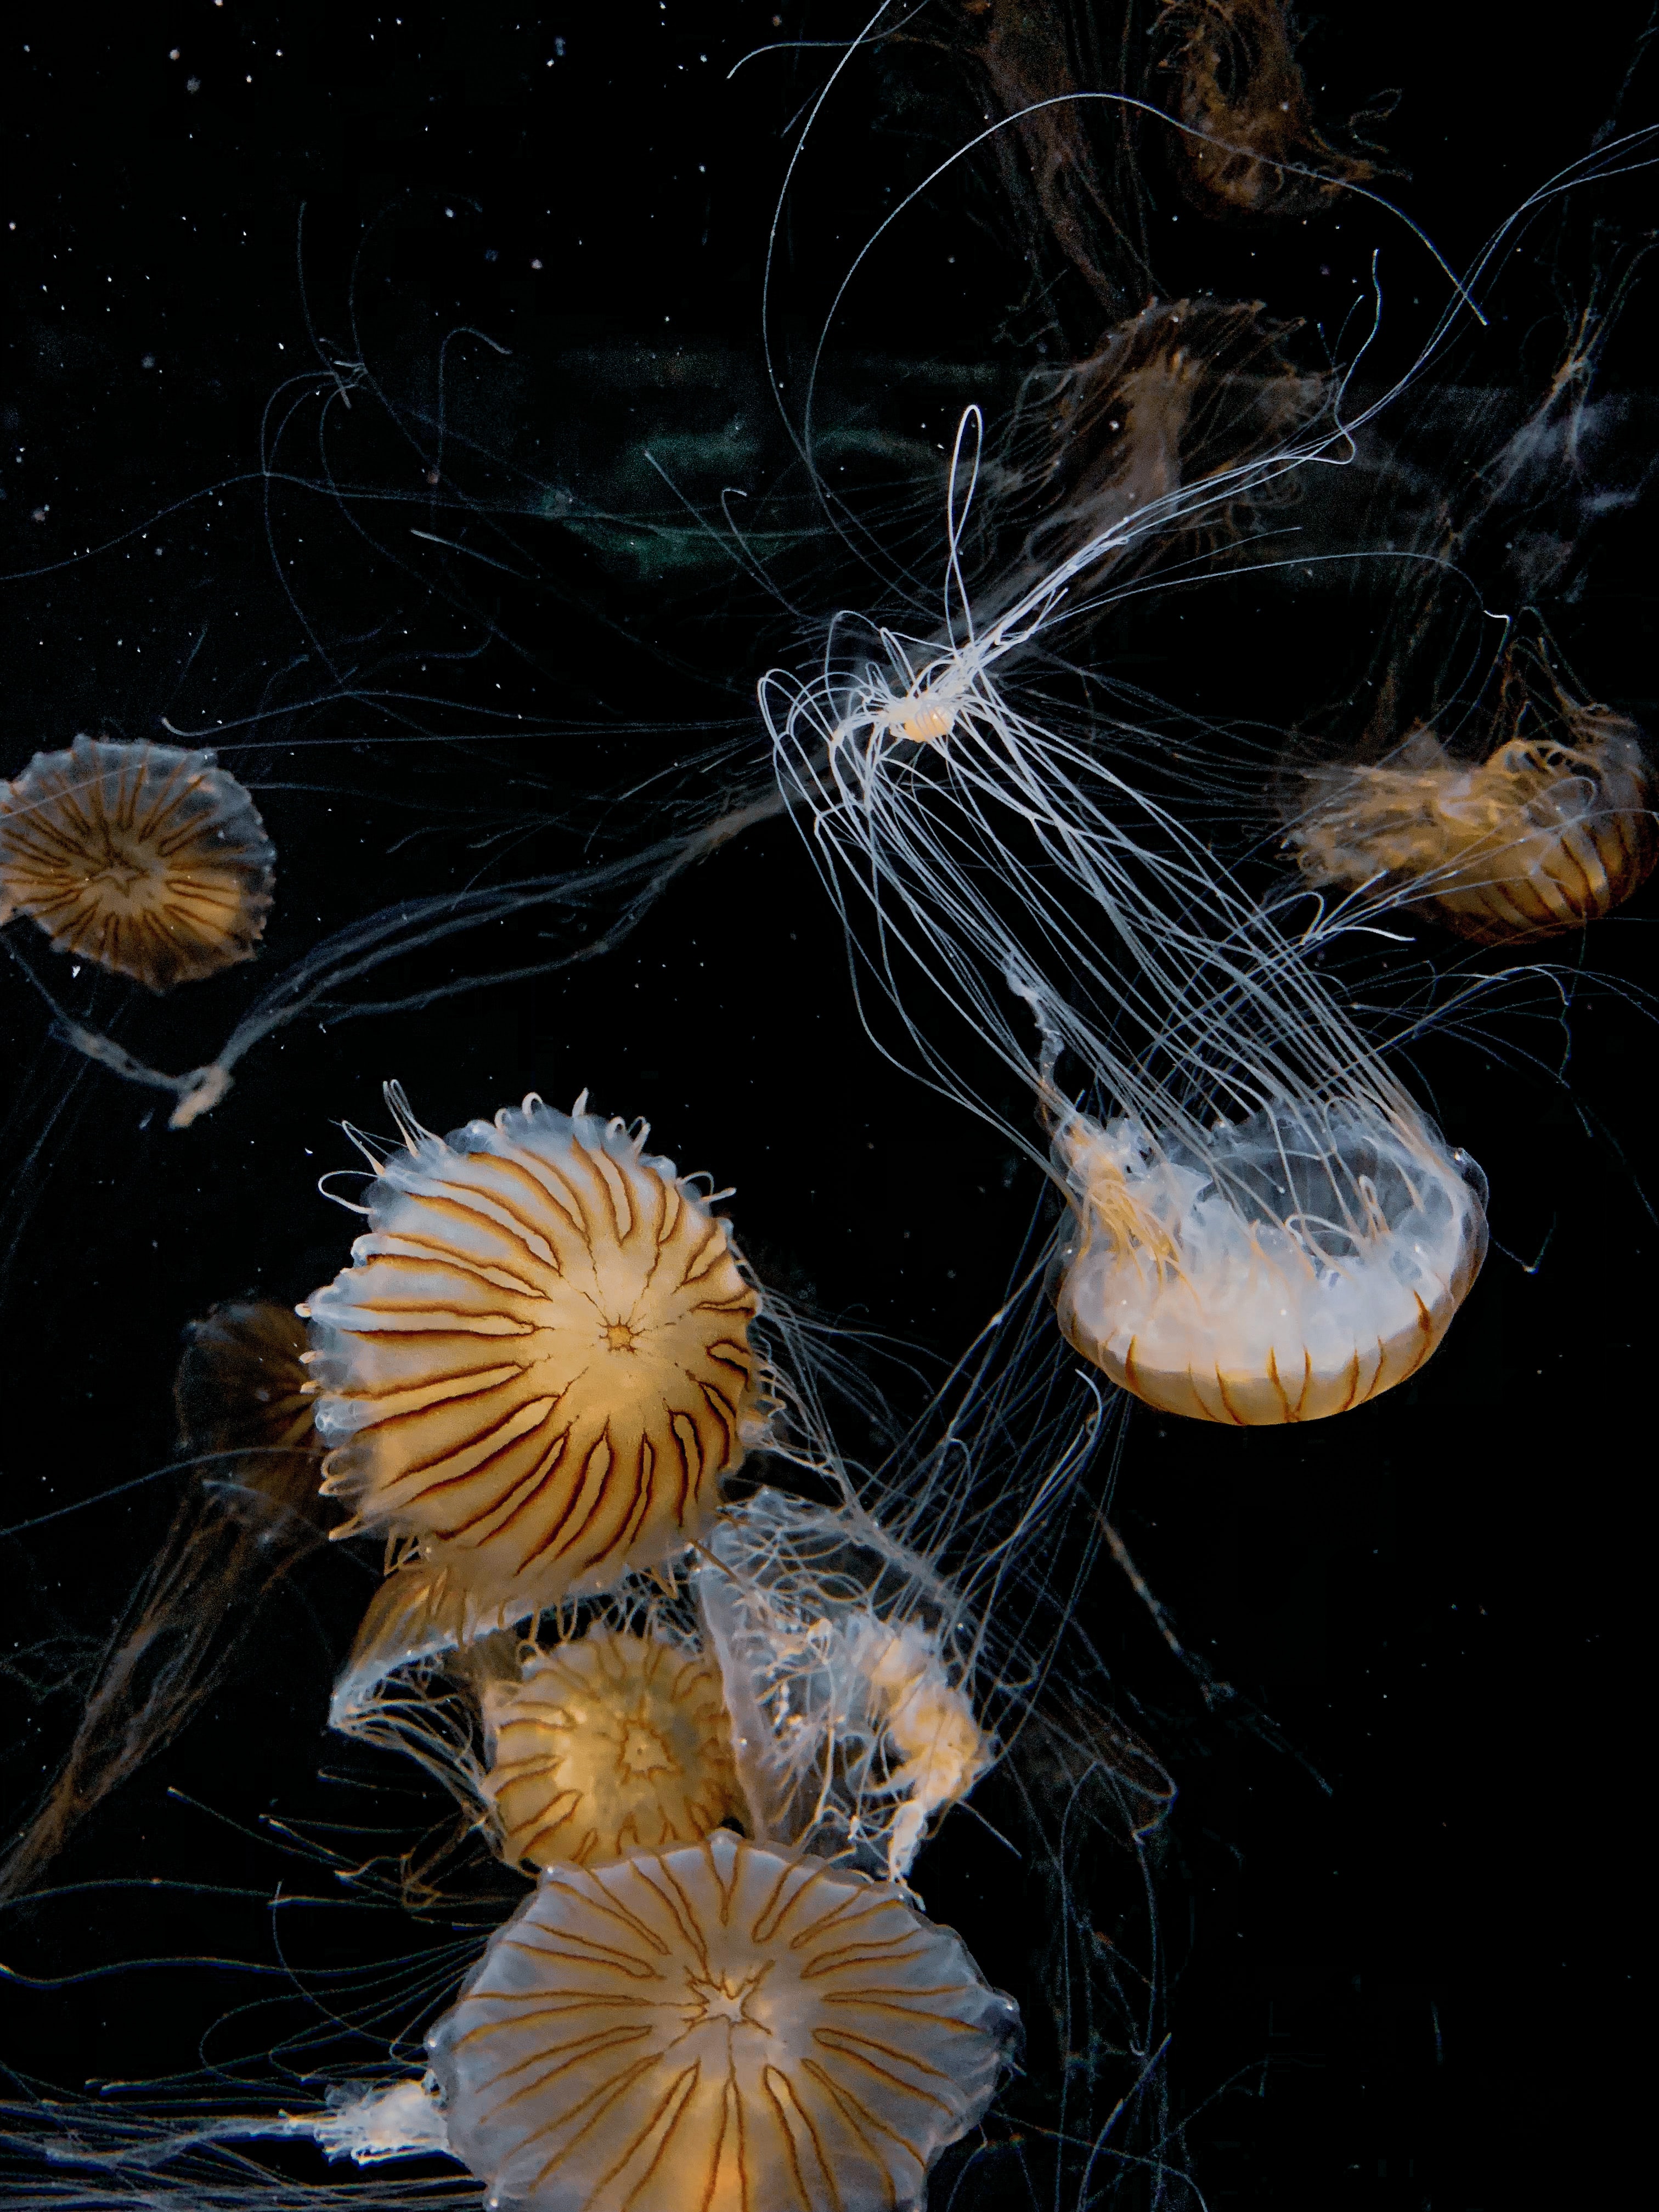 animals, jellyfish, black, tentacle, handsomely, it's beautiful